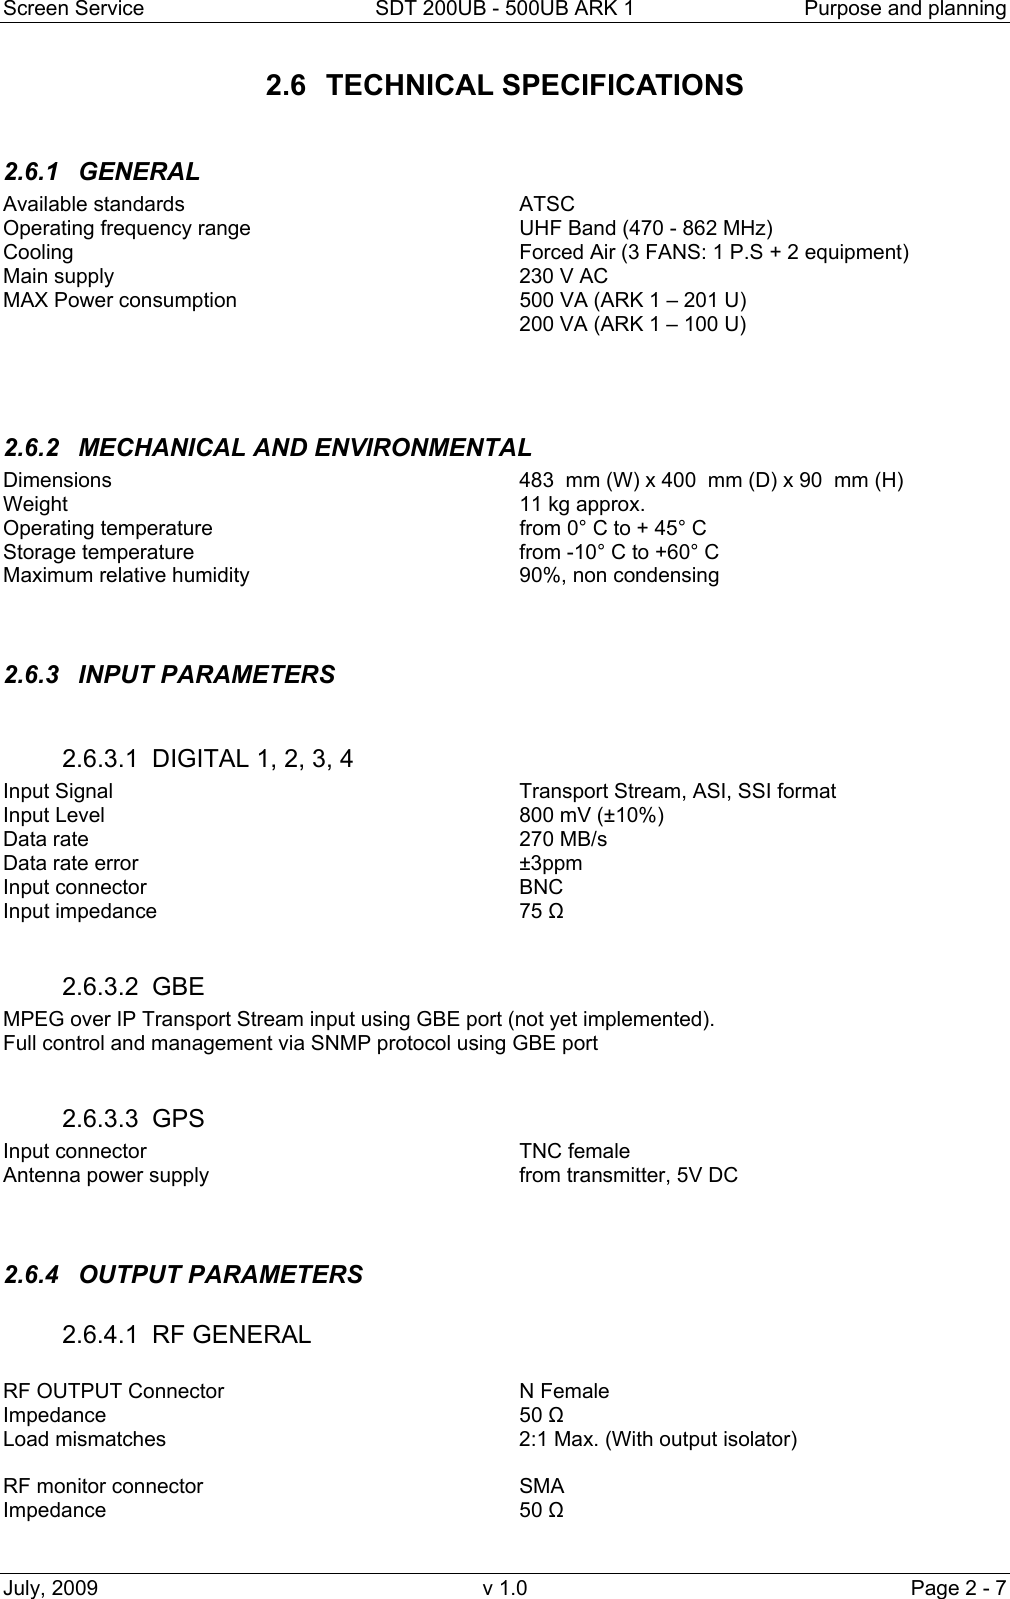 Screen Service  SDT 200UB - 500UB ARK 1  Purpose and planning July, 2009  v 1.0  Page 2 - 7 2.6 TECHNICAL SPECIFICATIONS  2.6.1 GENERAL  Available standards     ATSC Operating frequency range        UHF Band (470 - 862 MHz)    Cooling       Forced Air (3 FANS: 1 P.S + 2 equipment)  Main supply      230 V AC  MAX Power consumption        500 VA (ARK 1 – 201 U)        200 VA (ARK 1 – 100 U)                2.6.2  MECHANICAL AND ENVIRONMENTAL Dimensions            483  mm (W) x 400  mm (D) x 90  mm (H) Weight       11 kg approx. Operating temperature          from 0° C to + 45° C Storage temperature          from -10° C to +60° C Maximum relative humidity        90%, non condensing   2.6.3 INPUT PARAMETERS  2.6.3.1  DIGITAL 1, 2, 3, 4   Input Signal      Transport Stream, ASI, SSI format Input Level      800 mV (±10%) Data rate      270 MB/s Data rate error      ±3ppm Input connector      BNC Input impedance     75 Ω  2.6.3.2 GBE  MPEG over IP Transport Stream input using GBE port (not yet implemented). Full control and management via SNMP protocol using GBE port  2.6.3.3 GPS Input connector      TNC female Antenna power supply          from transmitter, 5V DC   2.6.4 OUTPUT PARAMETERS 2.6.4.1 RF GENERAL  RF OUTPUT Connector     N Female    Impedance      50 Ω Load mismatches           2:1 Max. (With output isolator)  RF monitor connector     SMA Impedance      50 Ω  